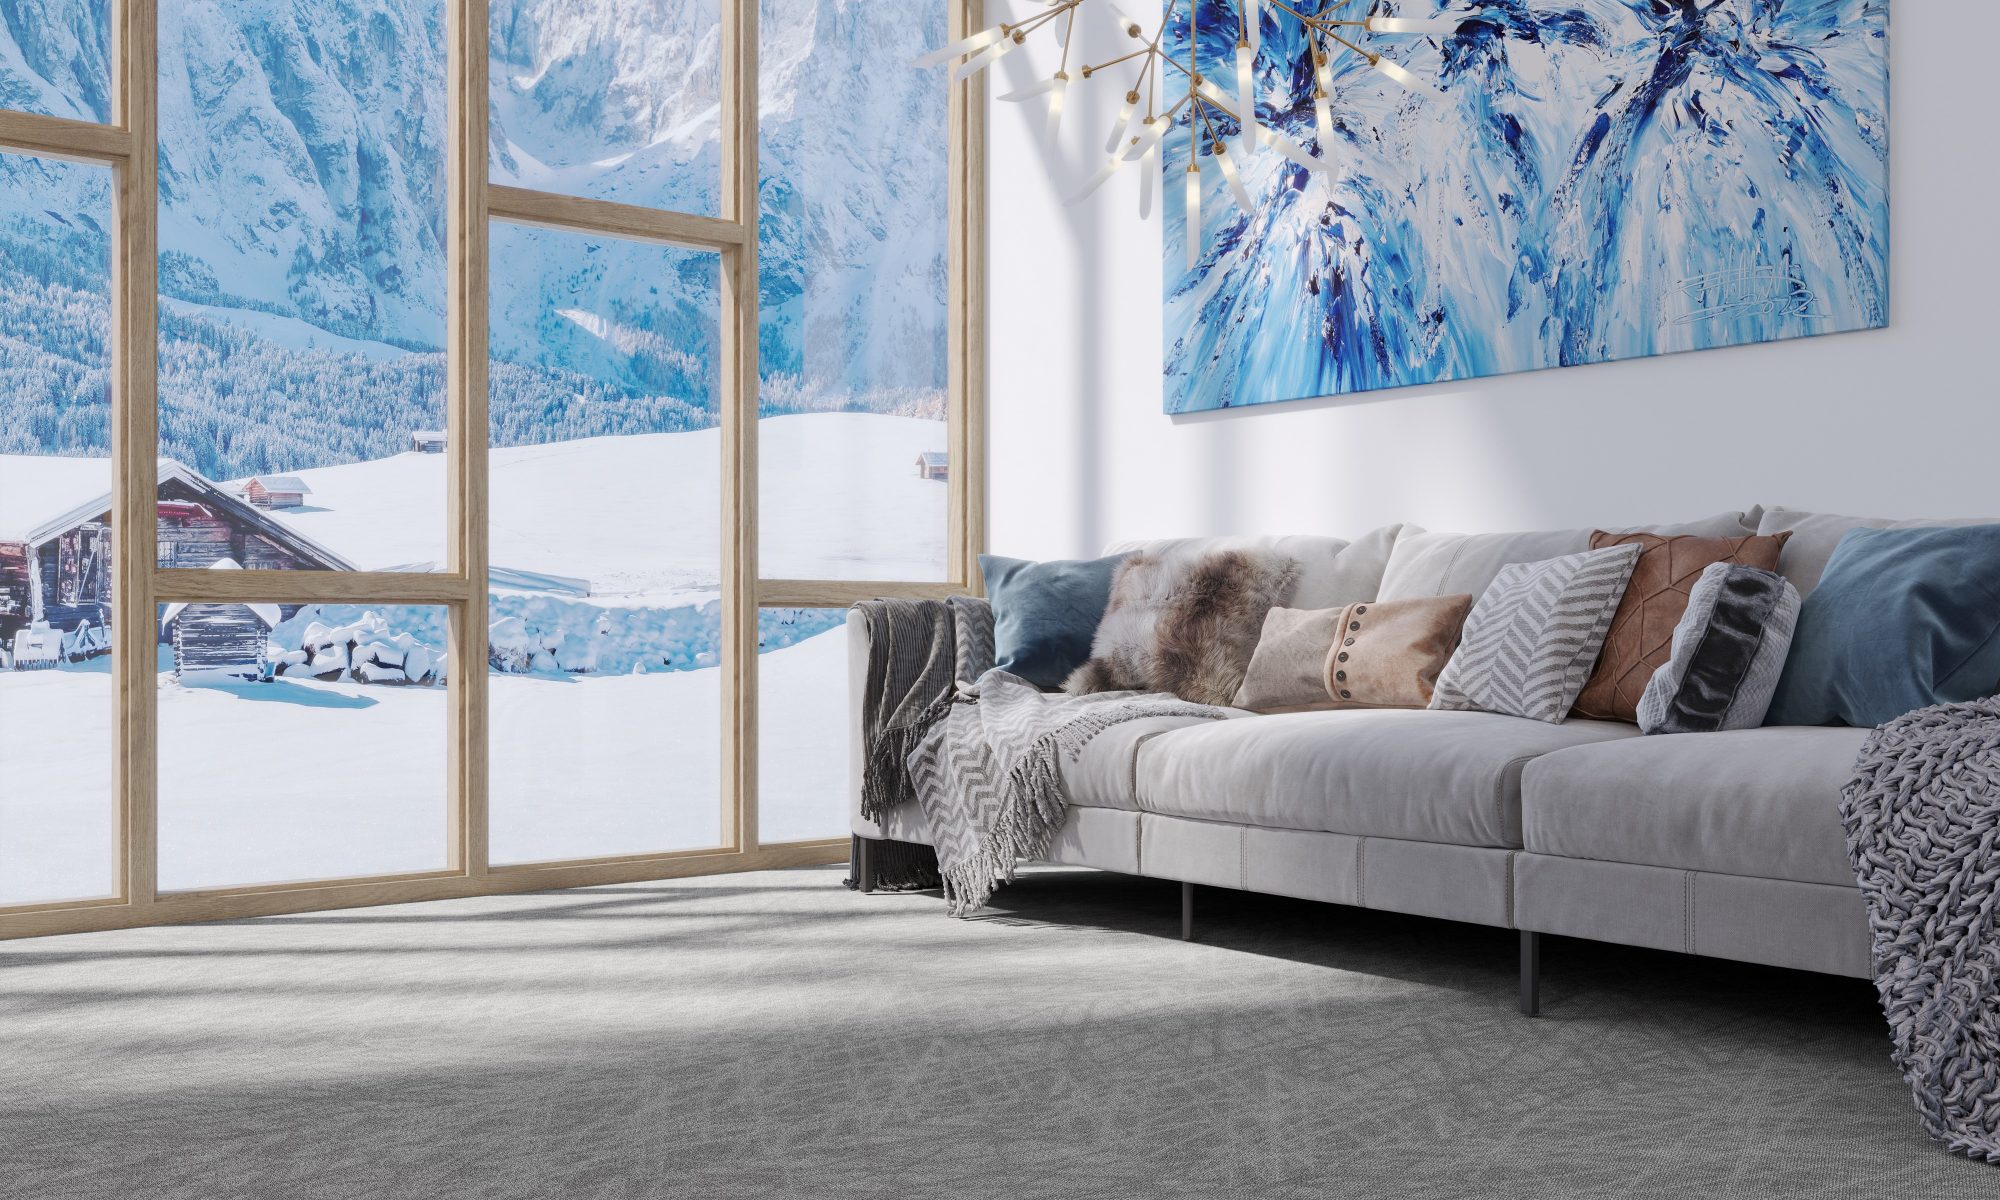 Fractured Ice Carpet Tile in alpine setting